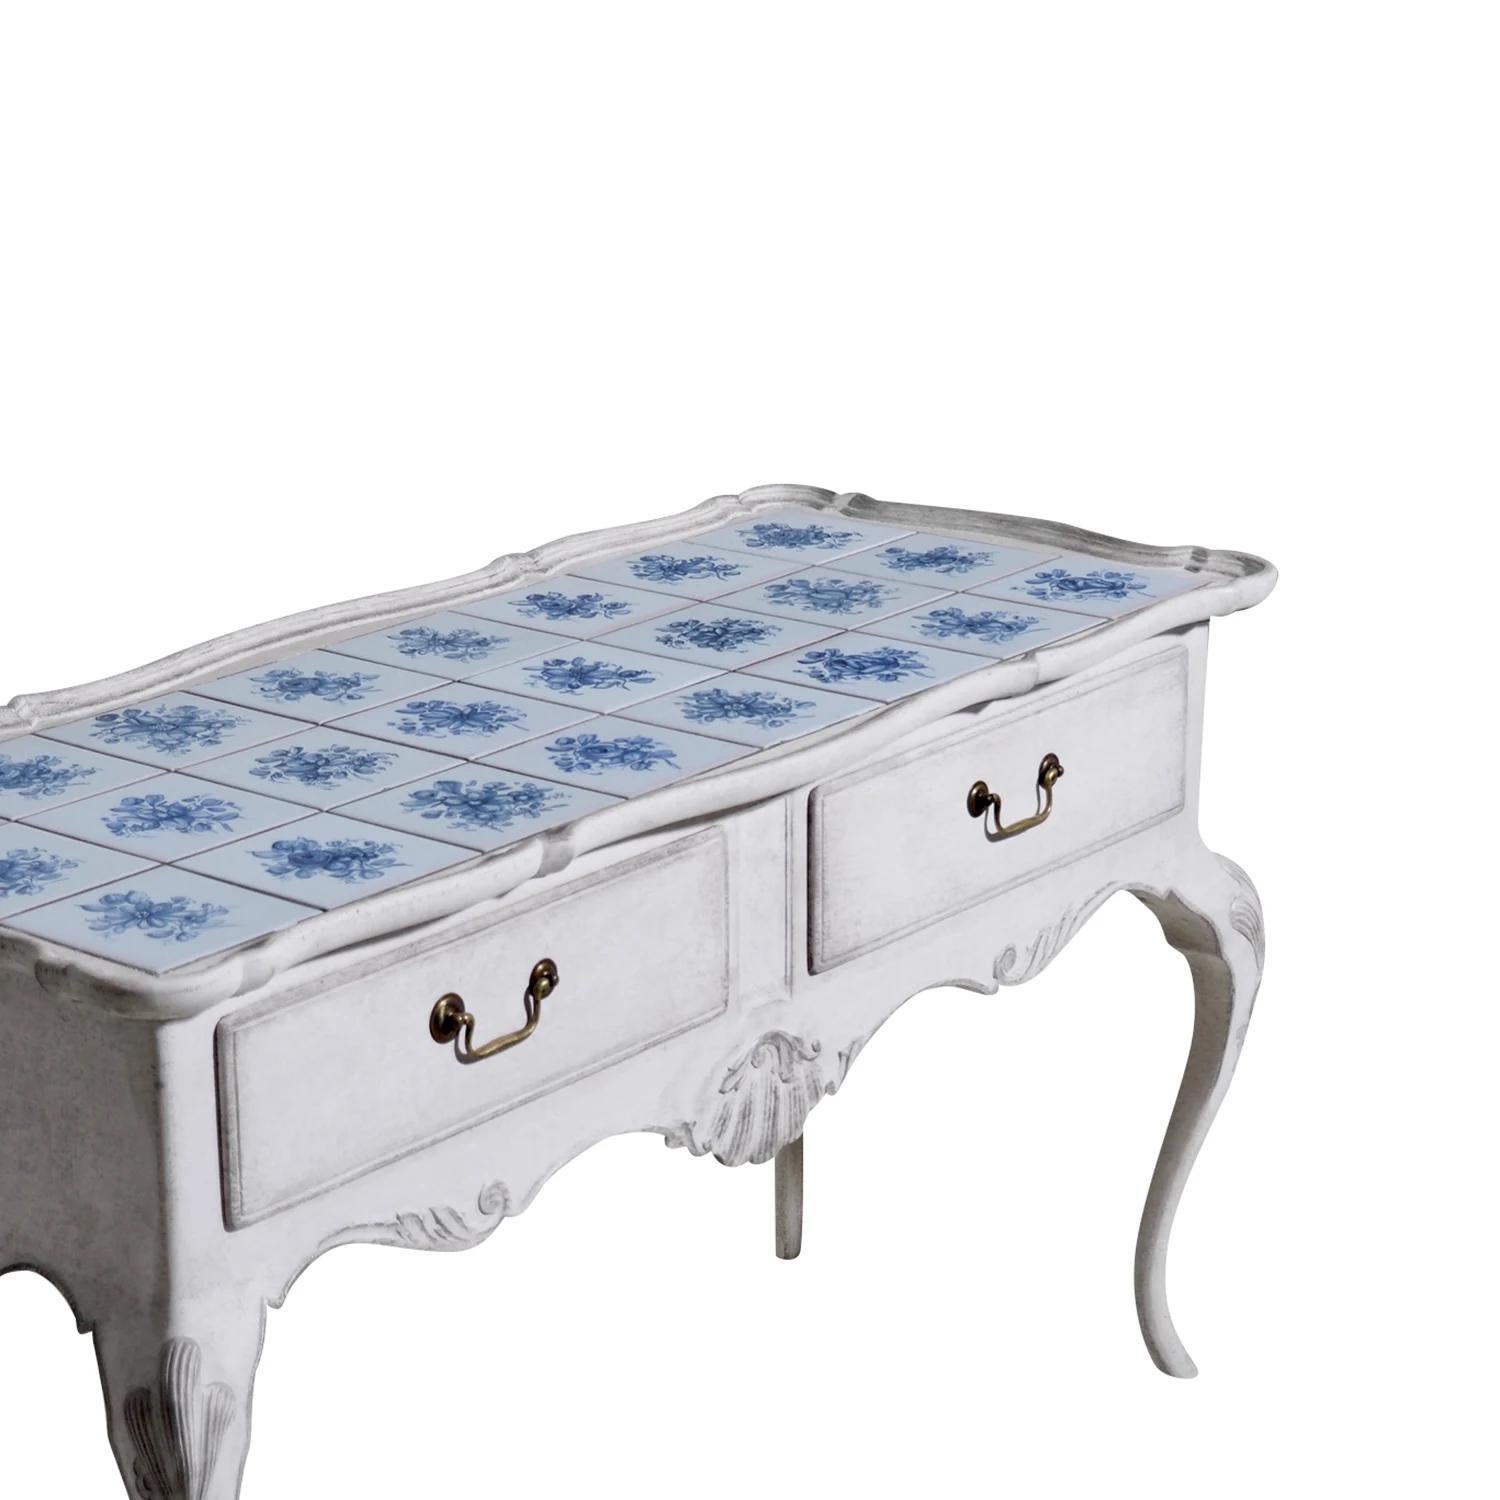 A light-grey, white antique Swedish Gustavian tile top console table with original blue tiles and two drawers. The sideboard is made of hand crafted painted Pinewood, in good condition. The freestanding Scandinavian side table is standing on four